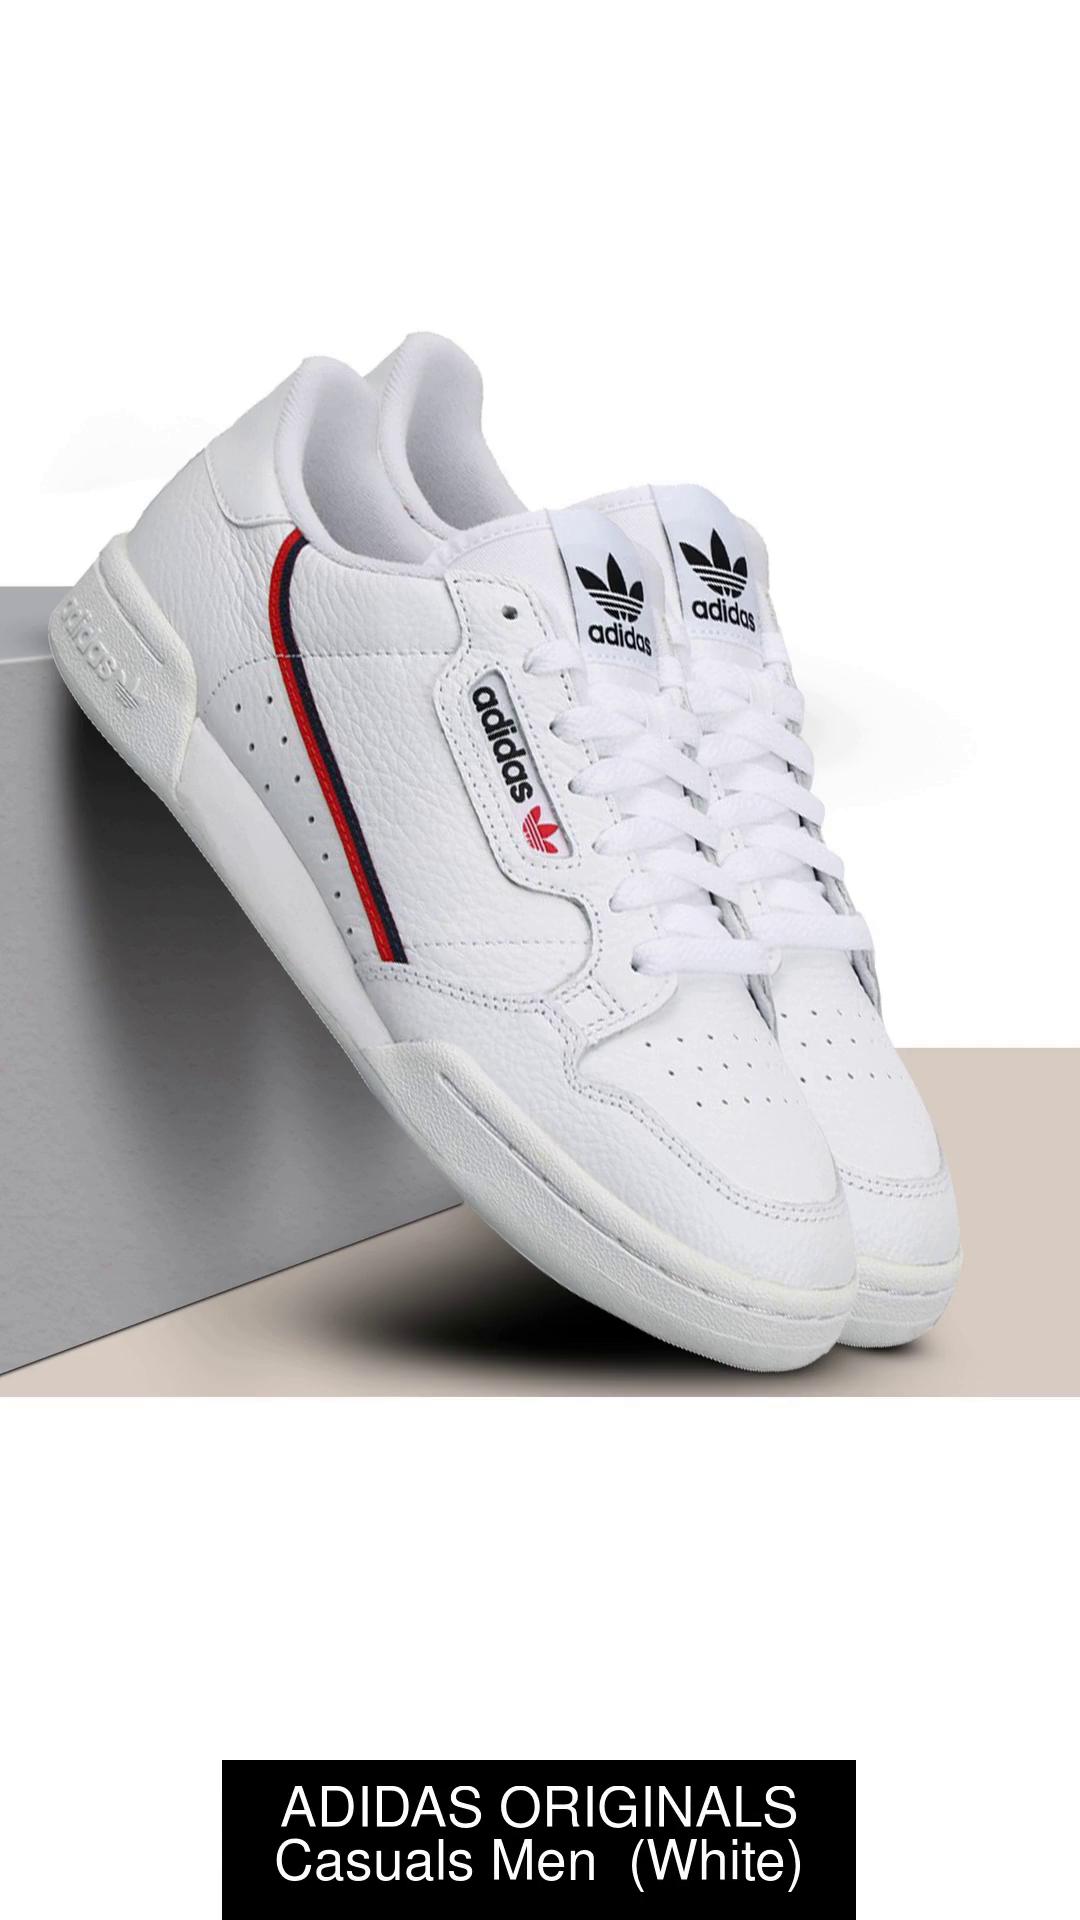 ADIDAS ORIGINALS Continental Online Best 80 India Men Men Online For Buy at 80 for ADIDAS - Sneakers Continental Footwears in ORIGINALS Sneakers Price - Shop For